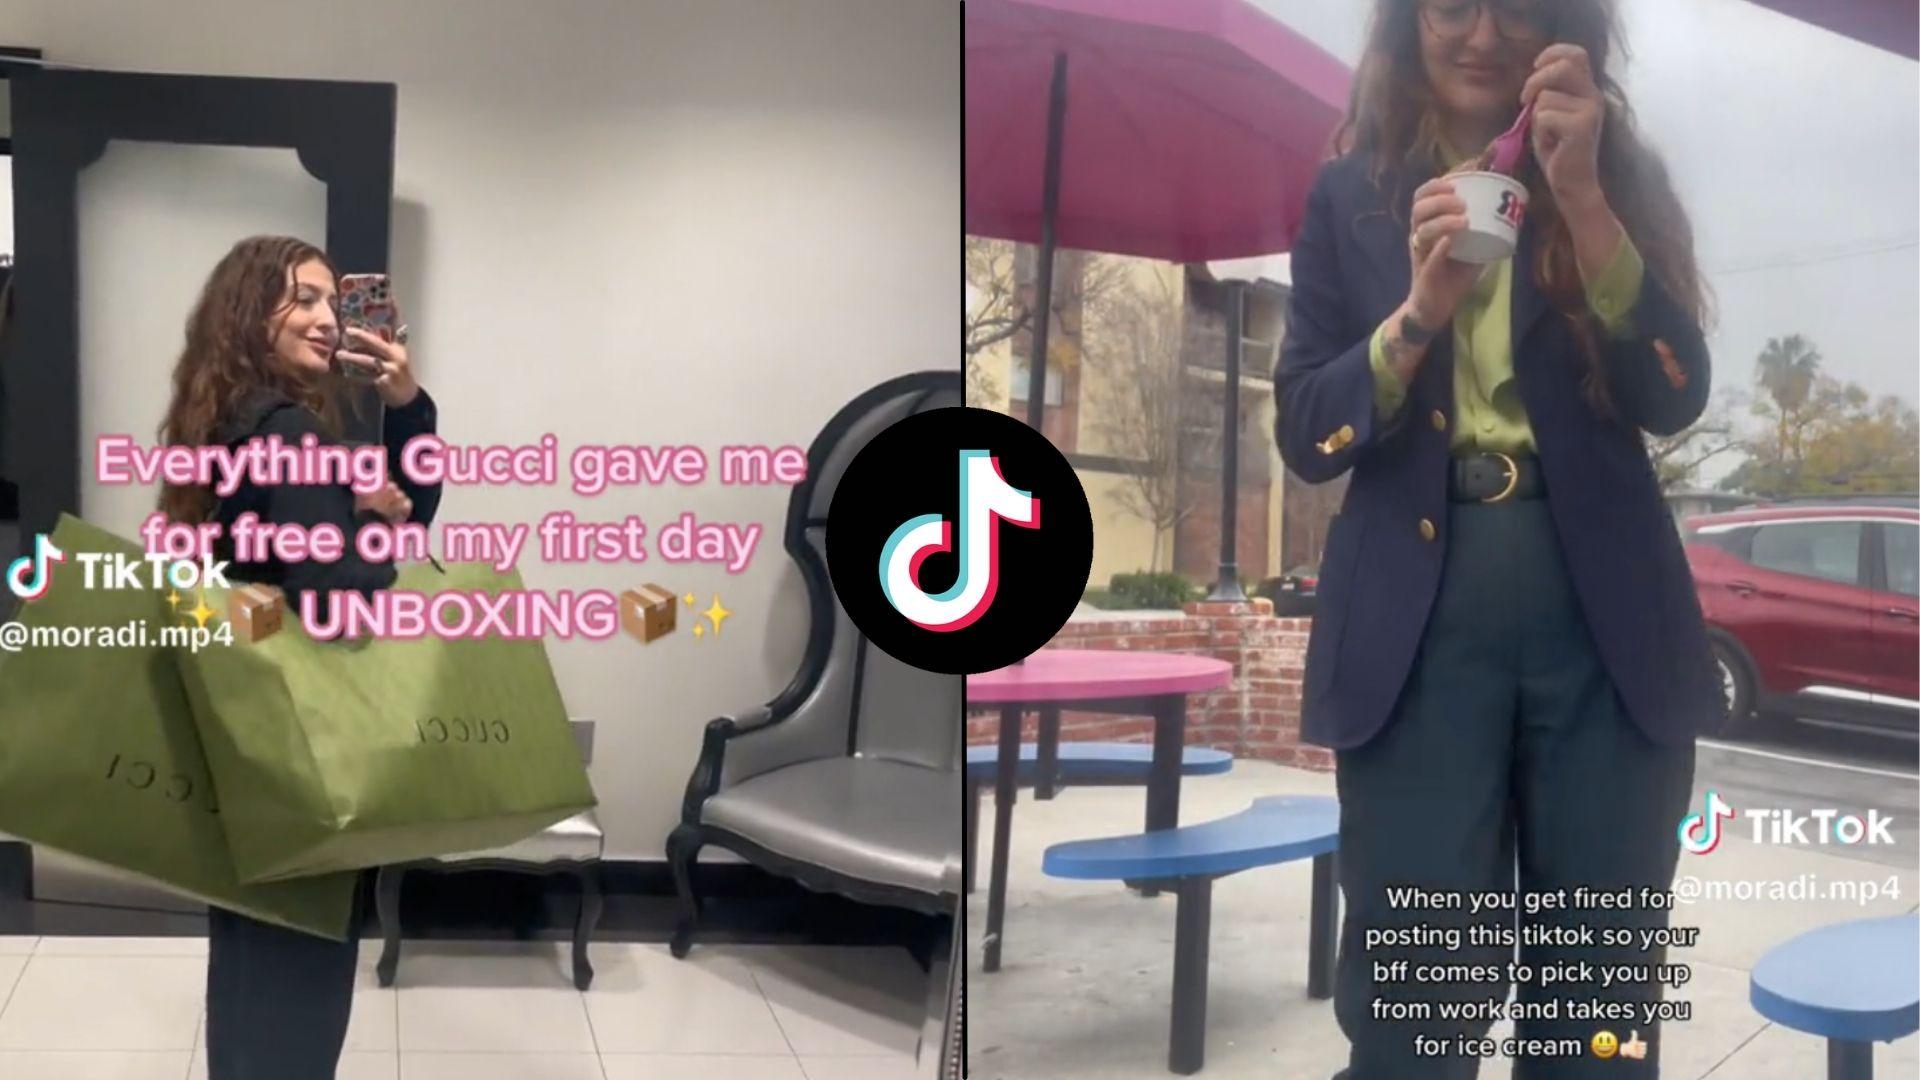 Screenshots of woman in Gucci with captions about getting fired on TikTok